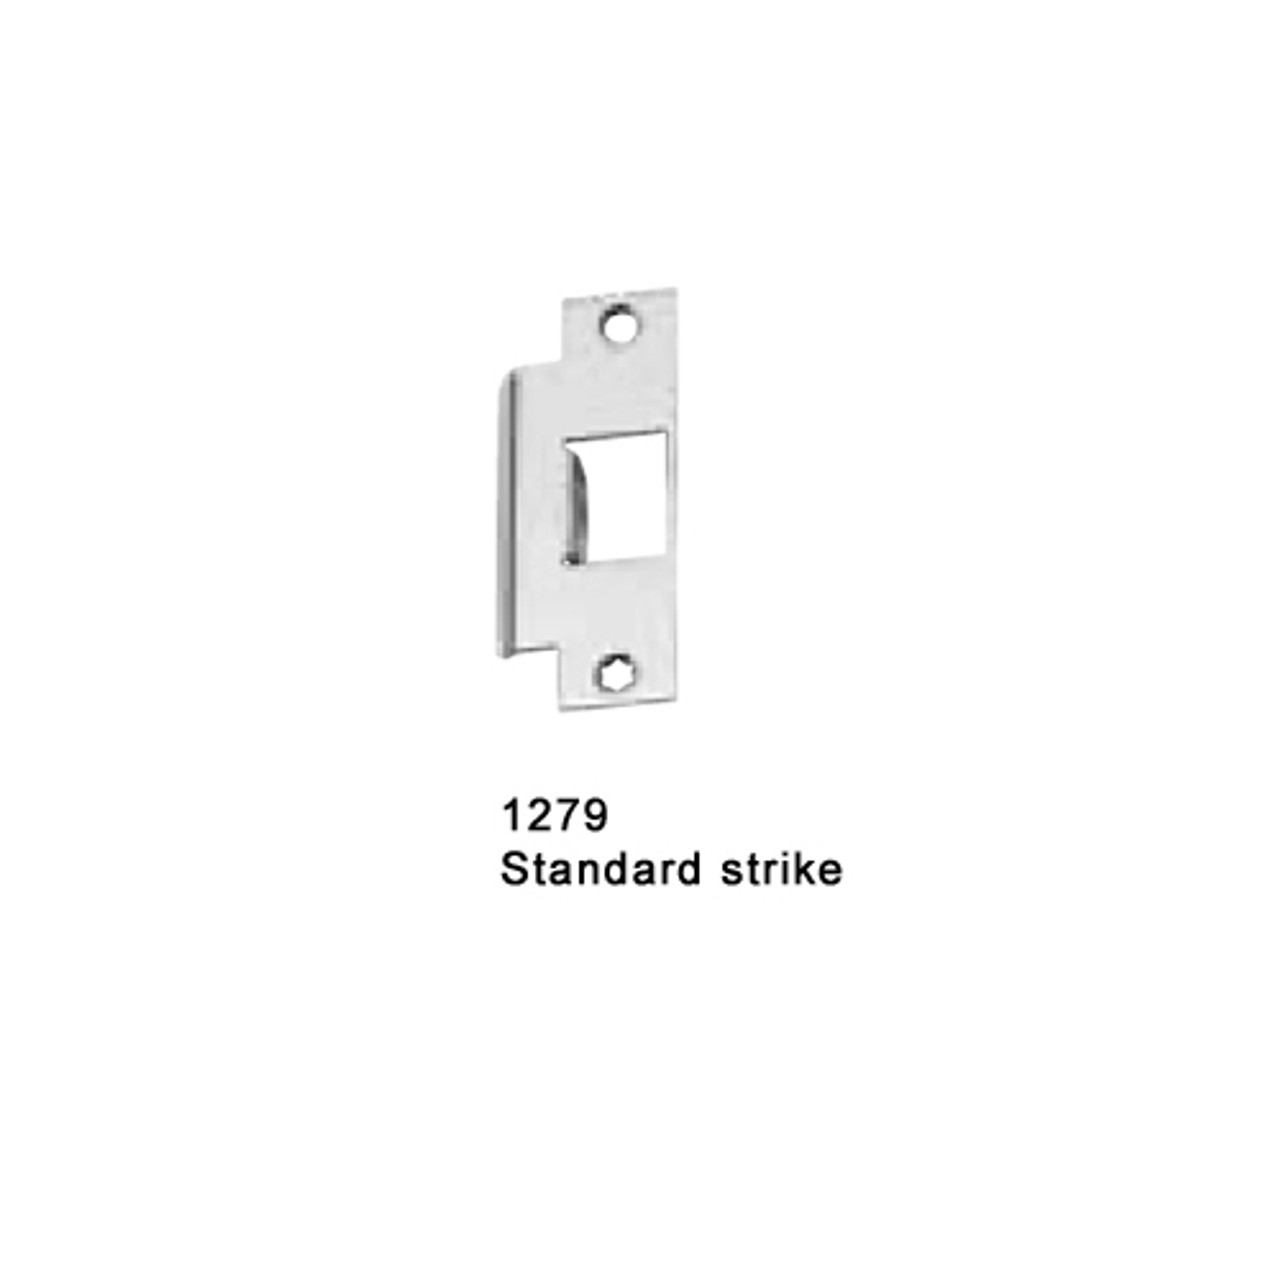 F-25-M-TP-BE-US28-3-RHR Falcon 25 Series Fire Rated Mortise Lock Devices 512TP-BE Thumbpiece Trim with Blank Escutcheon in Anodized Aluminum